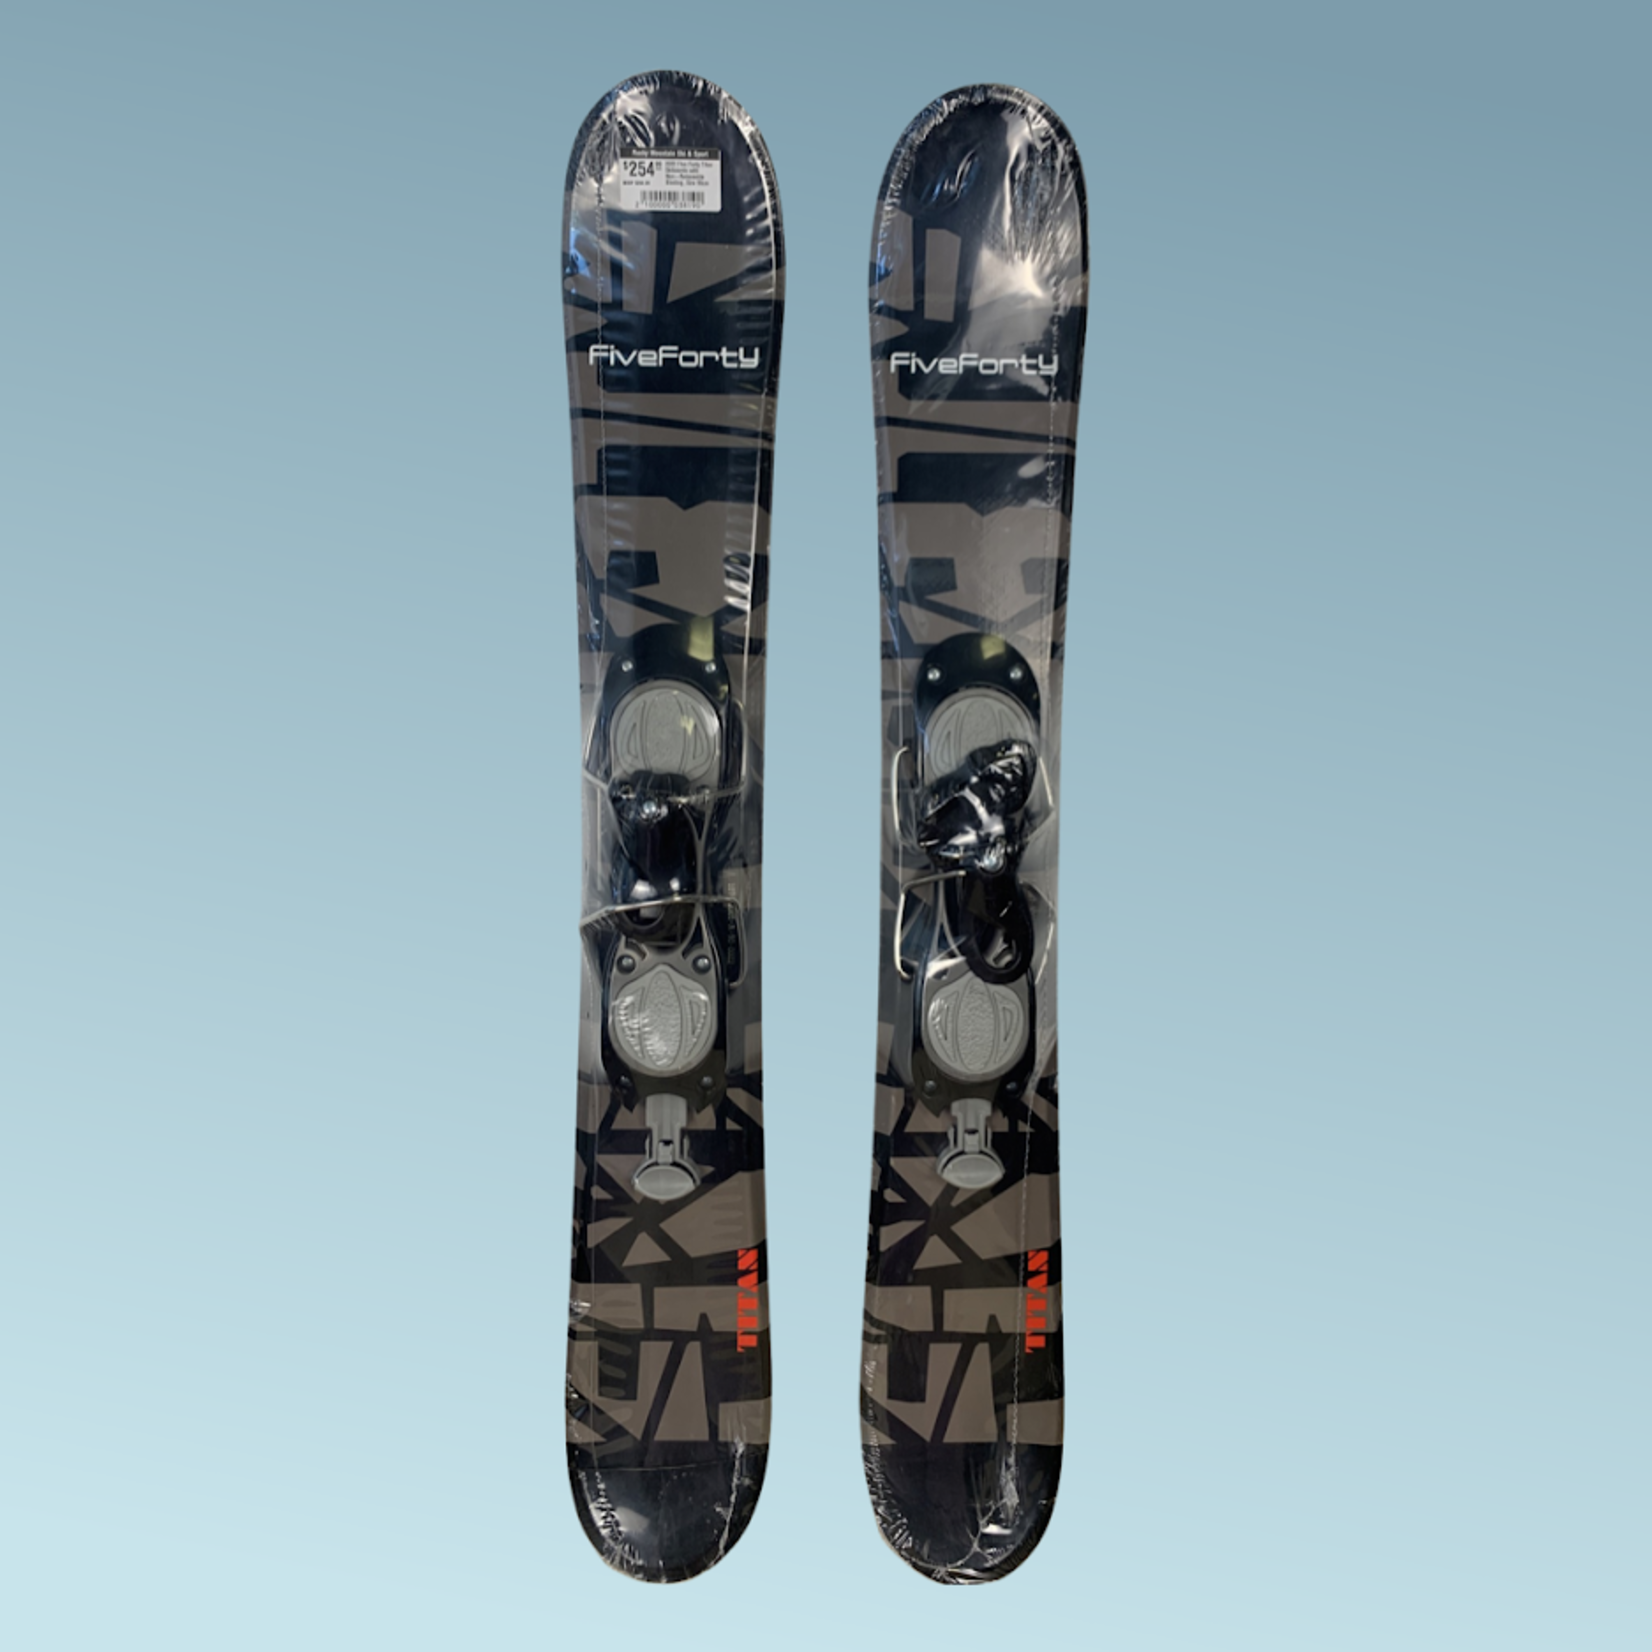 FiveForty NEW 2022 Five Forty Titan Skiboards with Non-Releasable Binding, Size 99cm